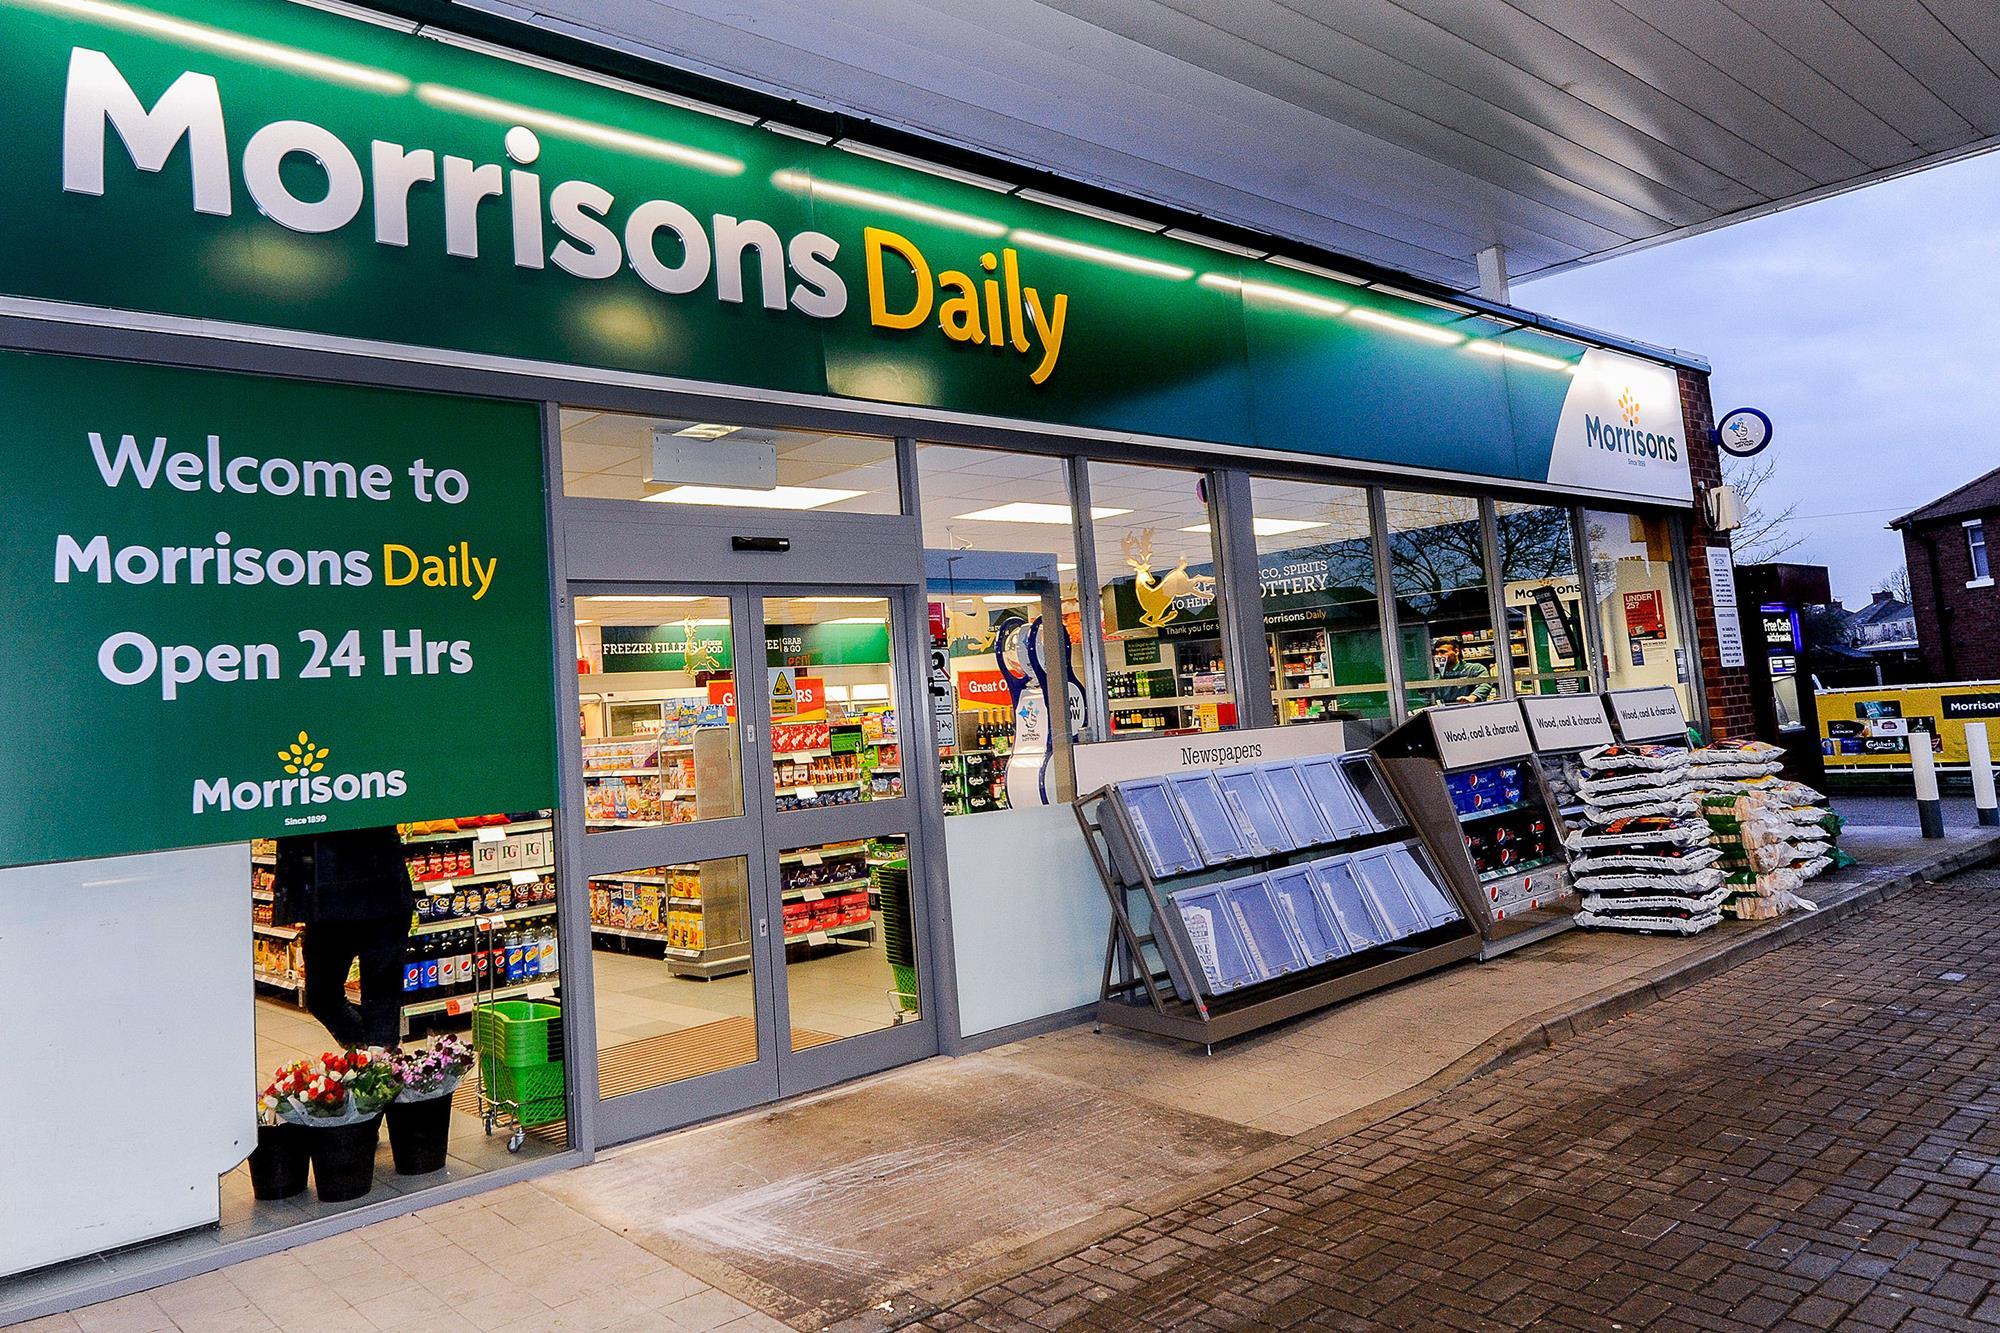 Store gallery: Morrisons' new 'Daily' petrol forecourt c-stores open Gallery | Retail Week